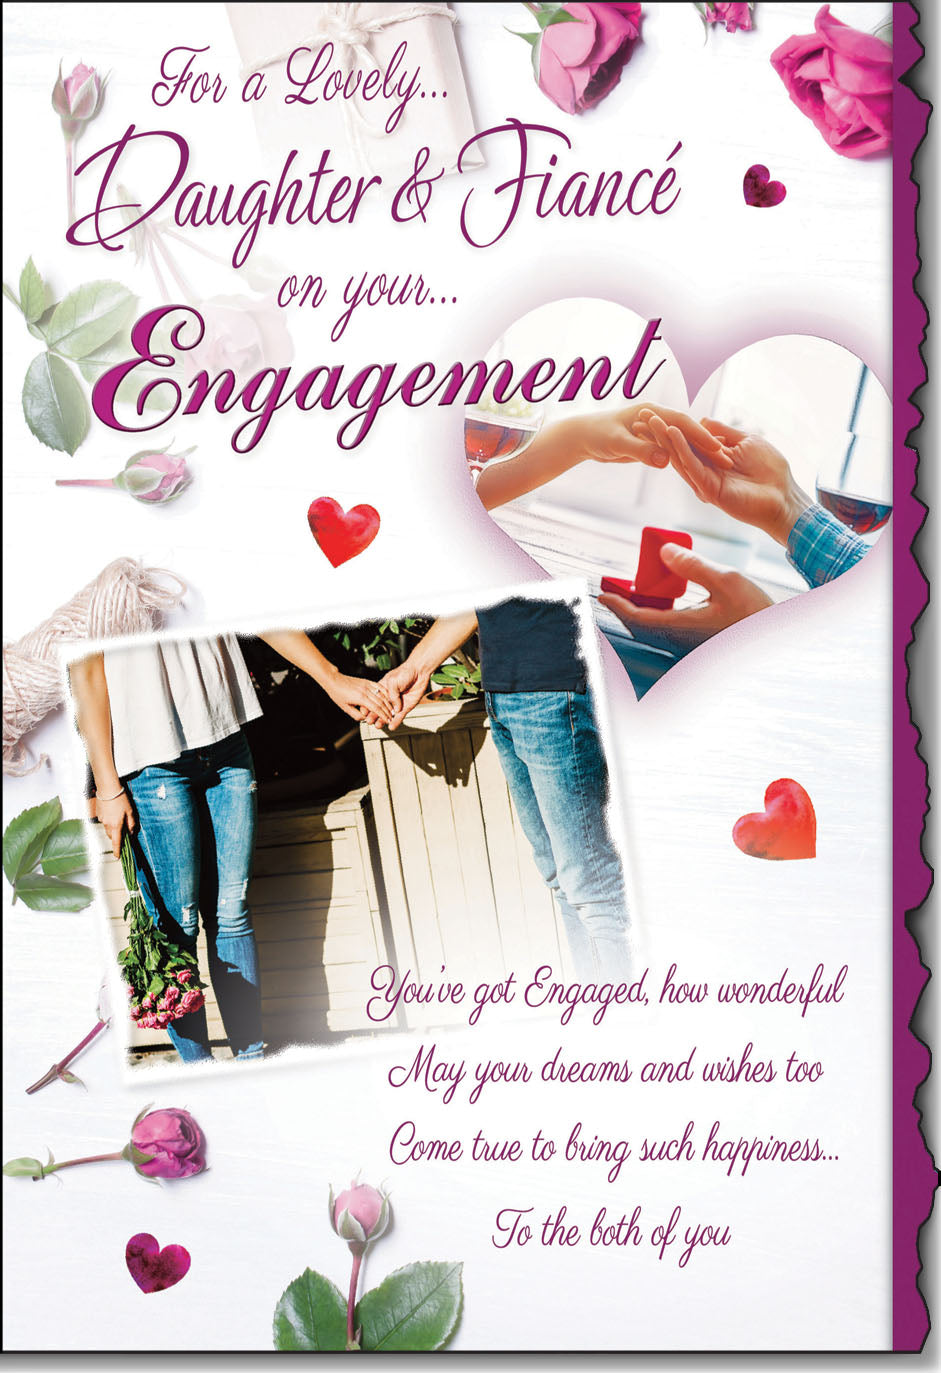 Daughter and Fiancé engagement congratulations card